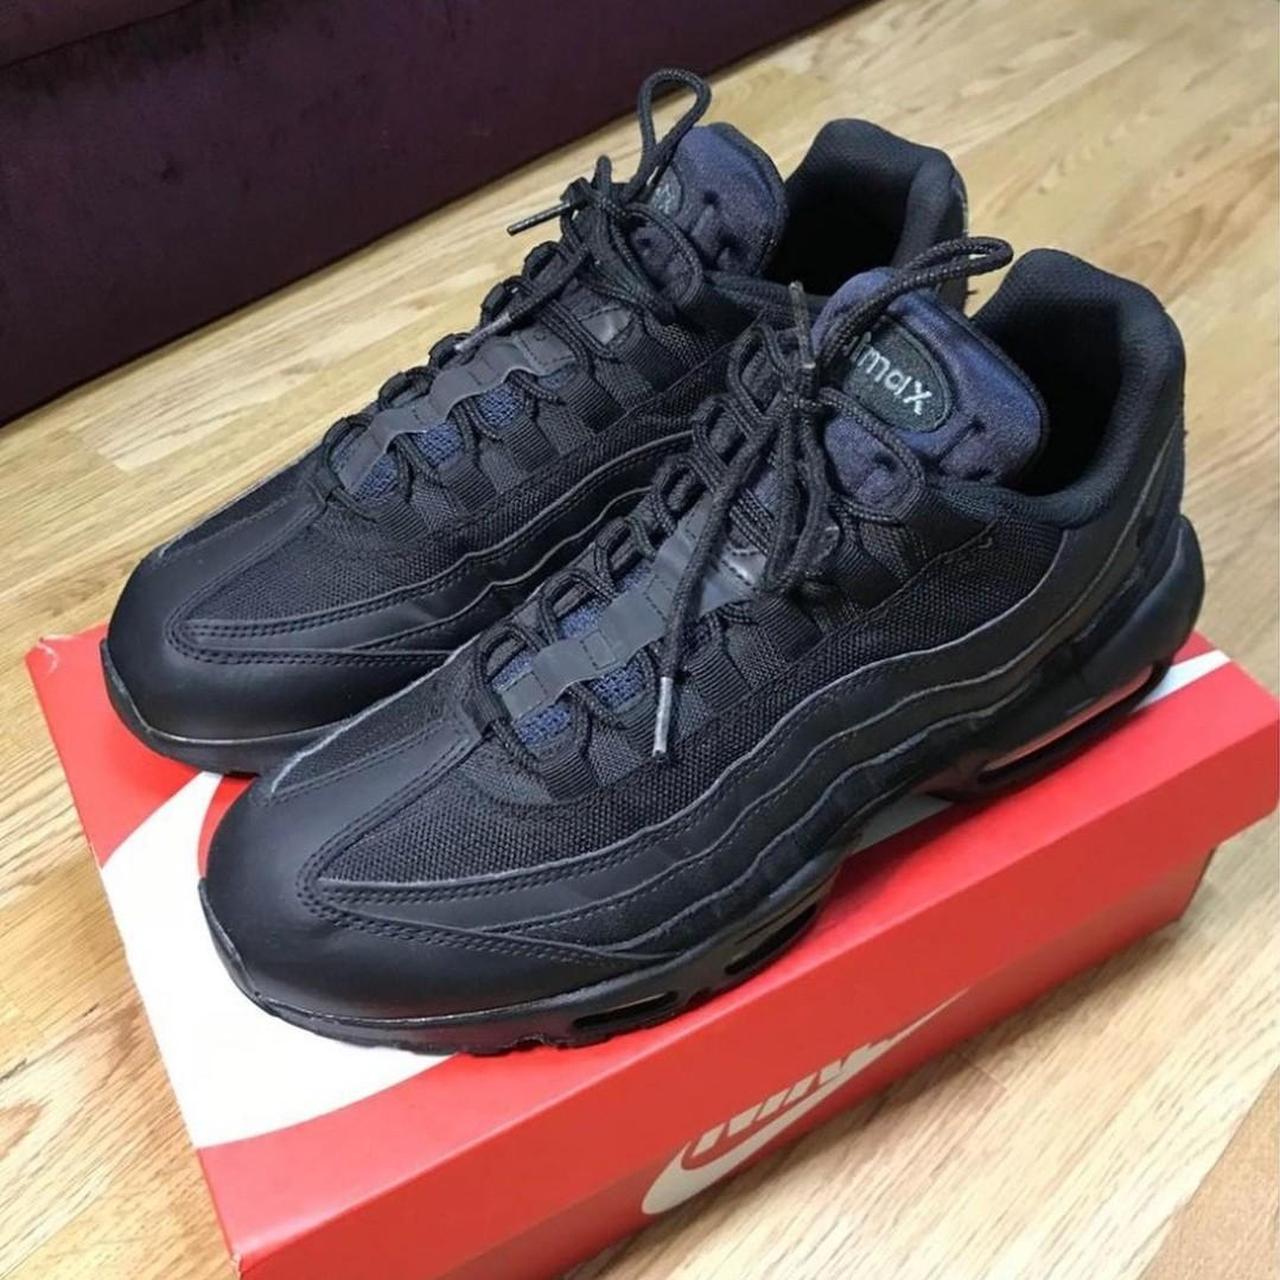 Nike air max 95 size 10 brand new with box - Depop